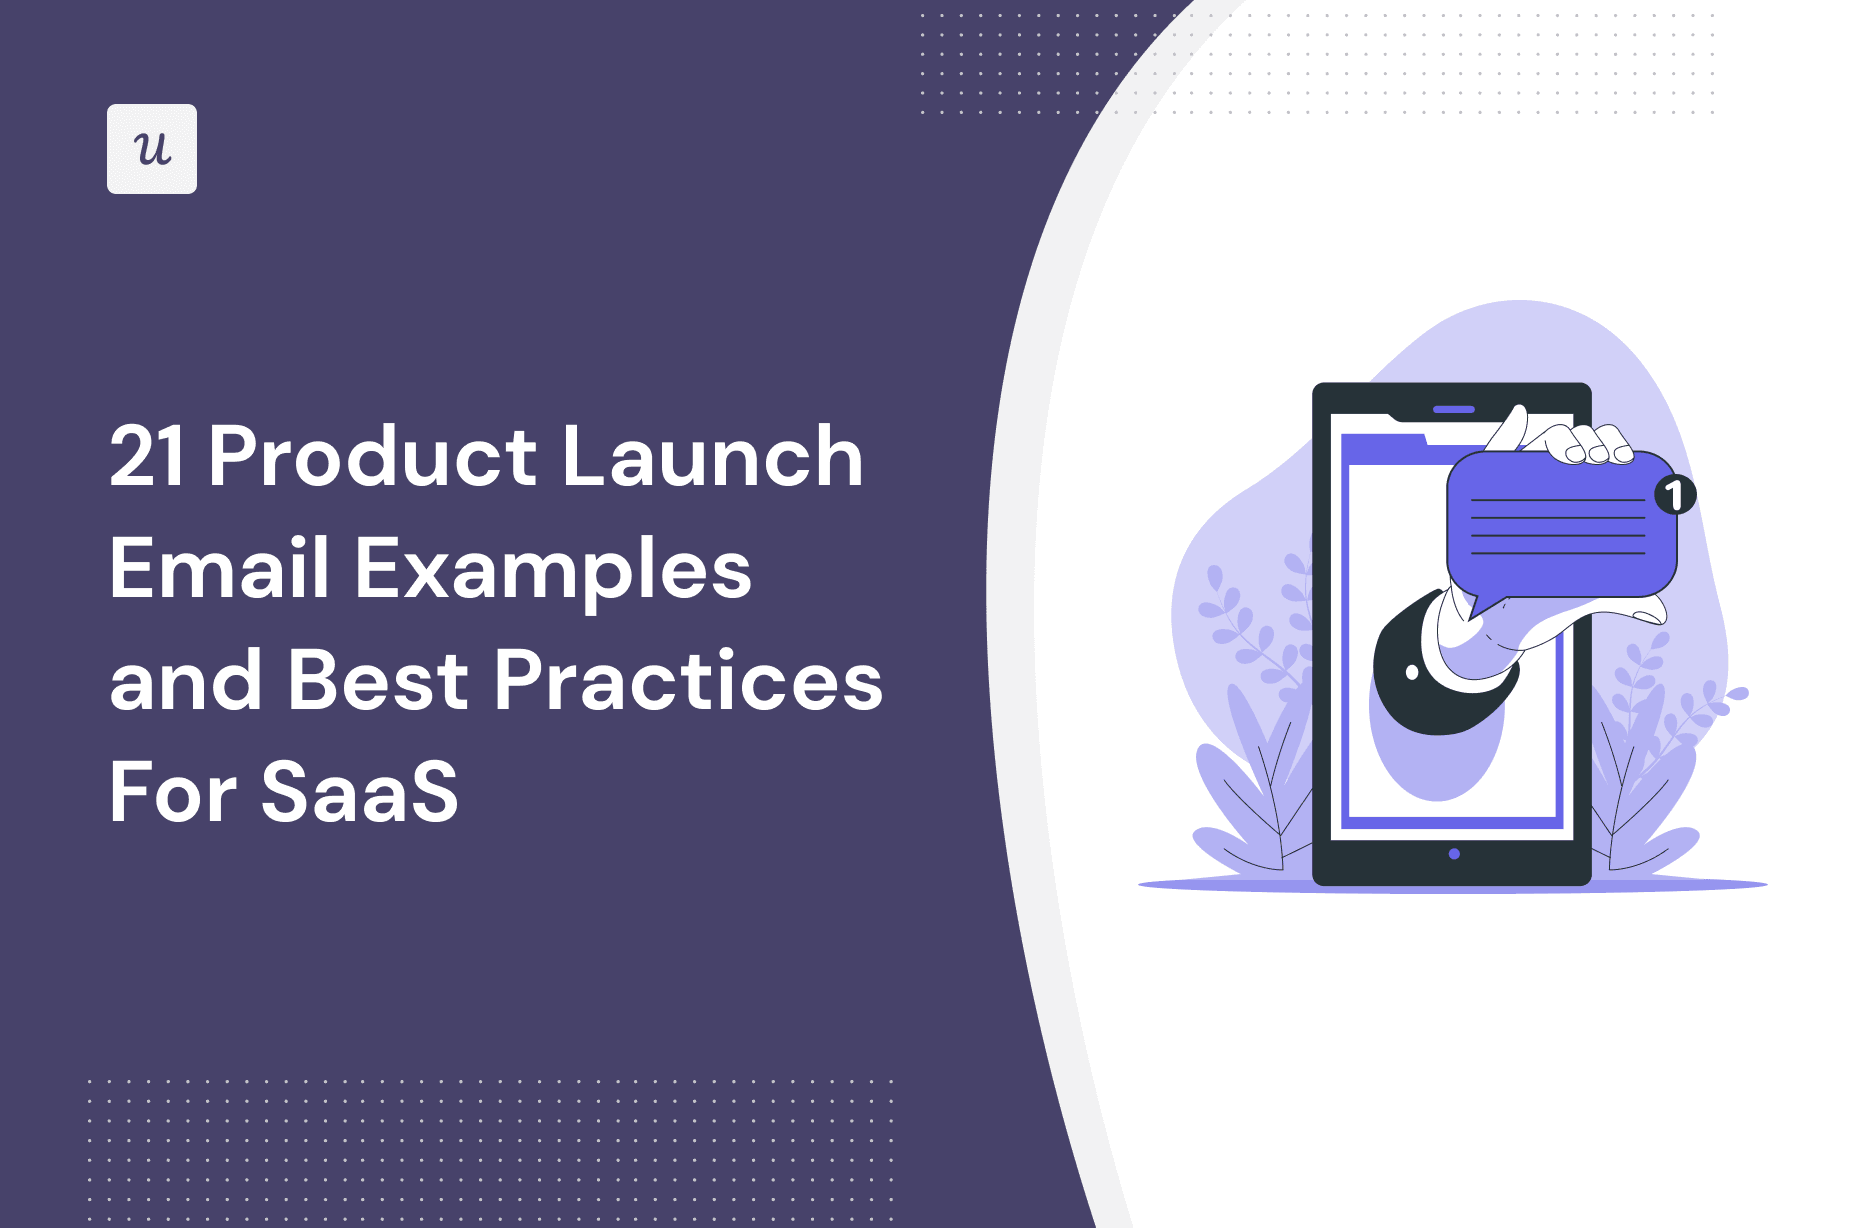 21 Product Launch Email Examples and Best Practices For SaaS cover